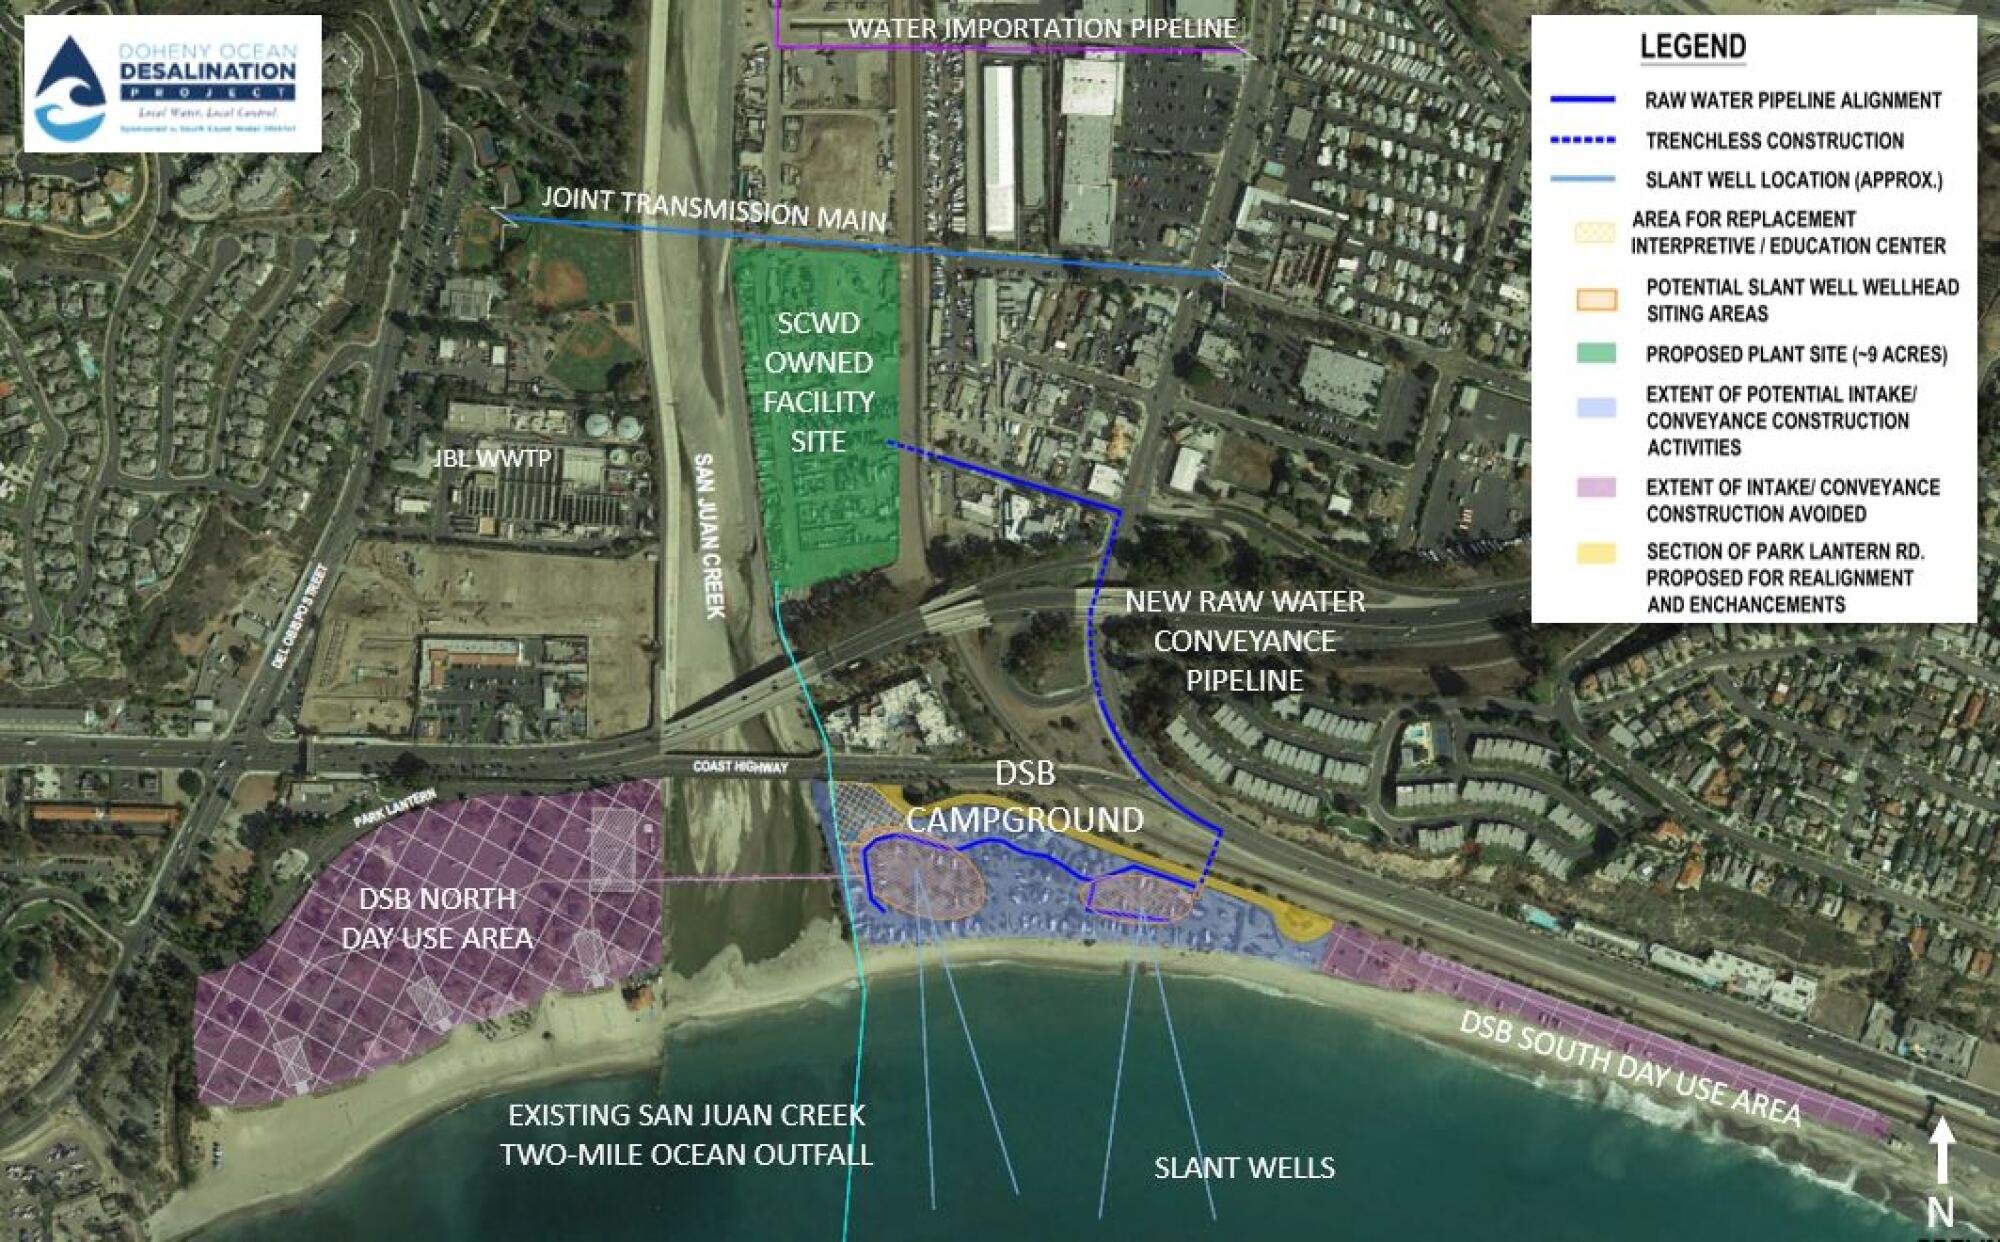 A site map for the proposed Doheny desalination plant shows how pipelines will travel from the ocean to the facility.